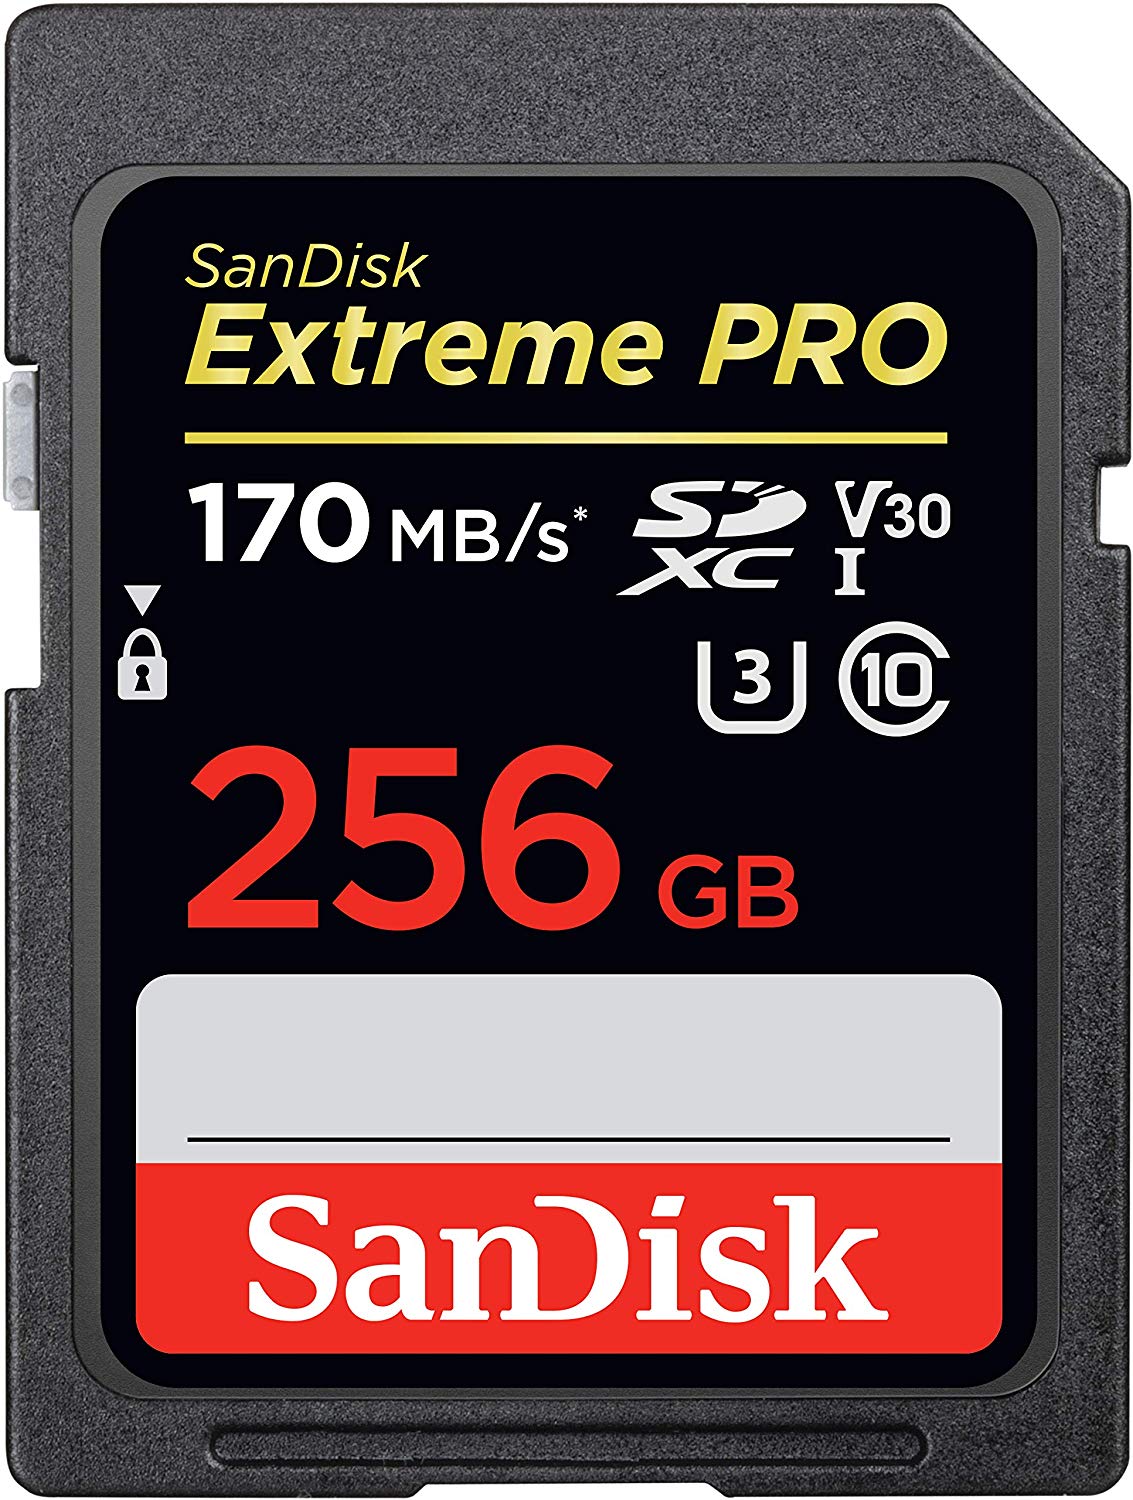 You are currently viewing SanDisk 256GB Extreme PRO 170 Mbs SDXC UHS-I Card